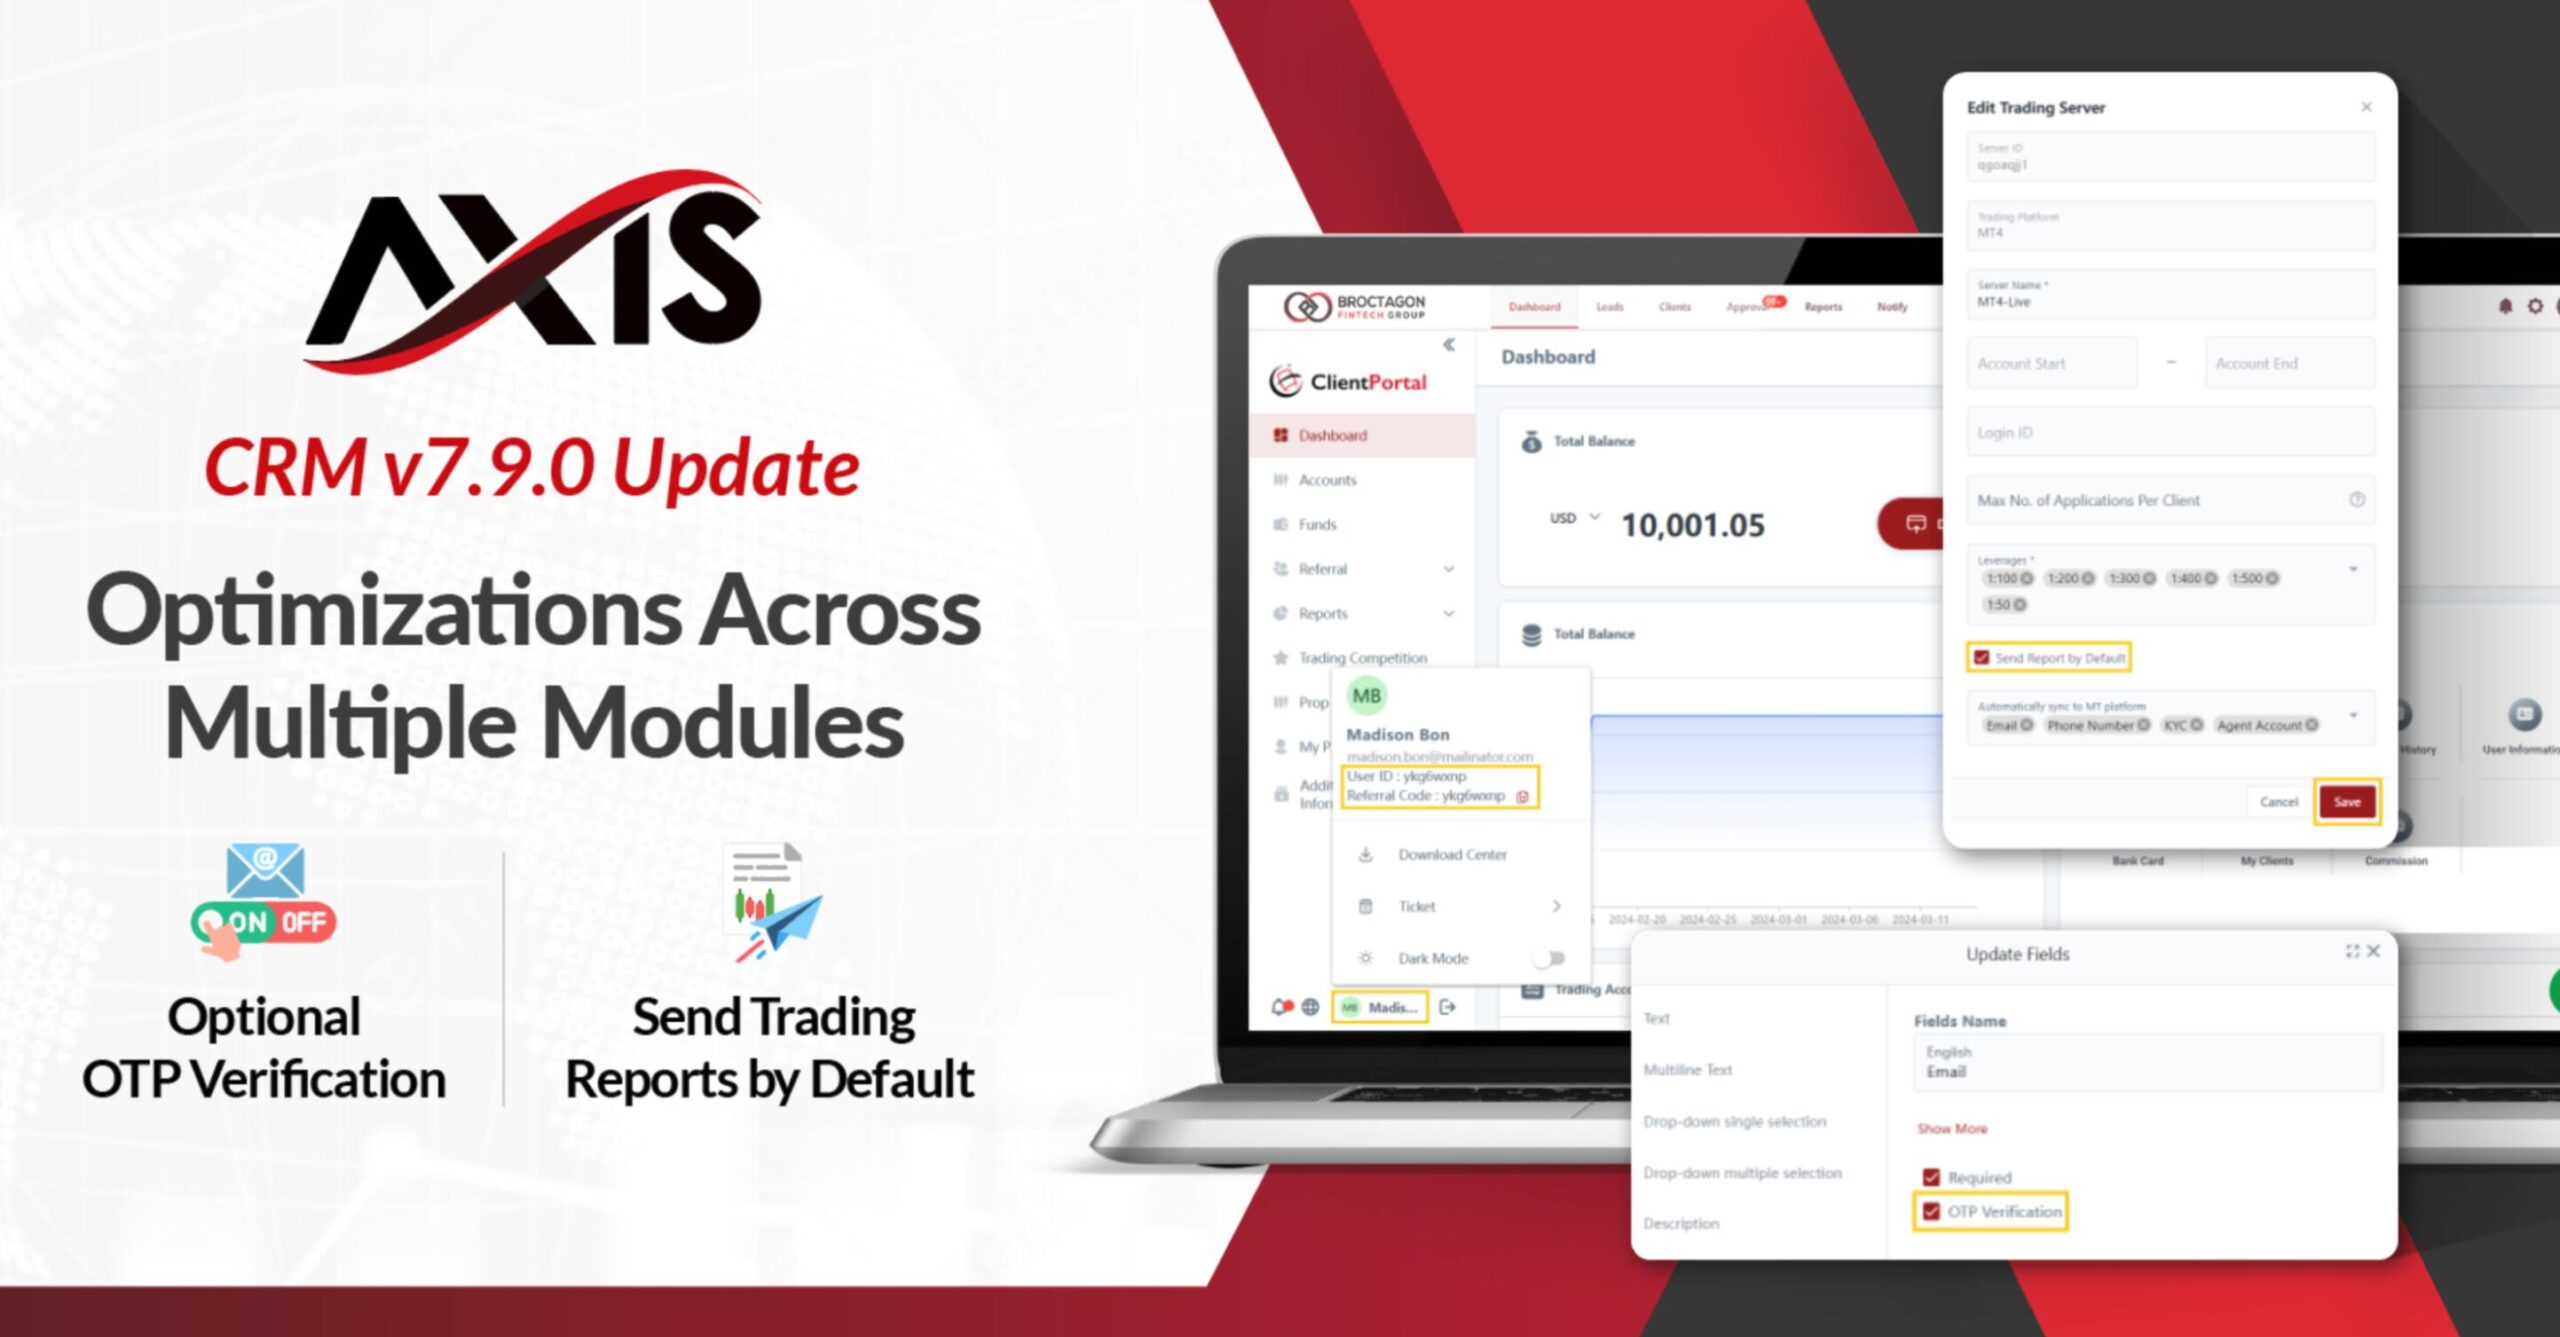 AXIS CRM v7.9.0 Update – Optimizations Across Multiple Modules